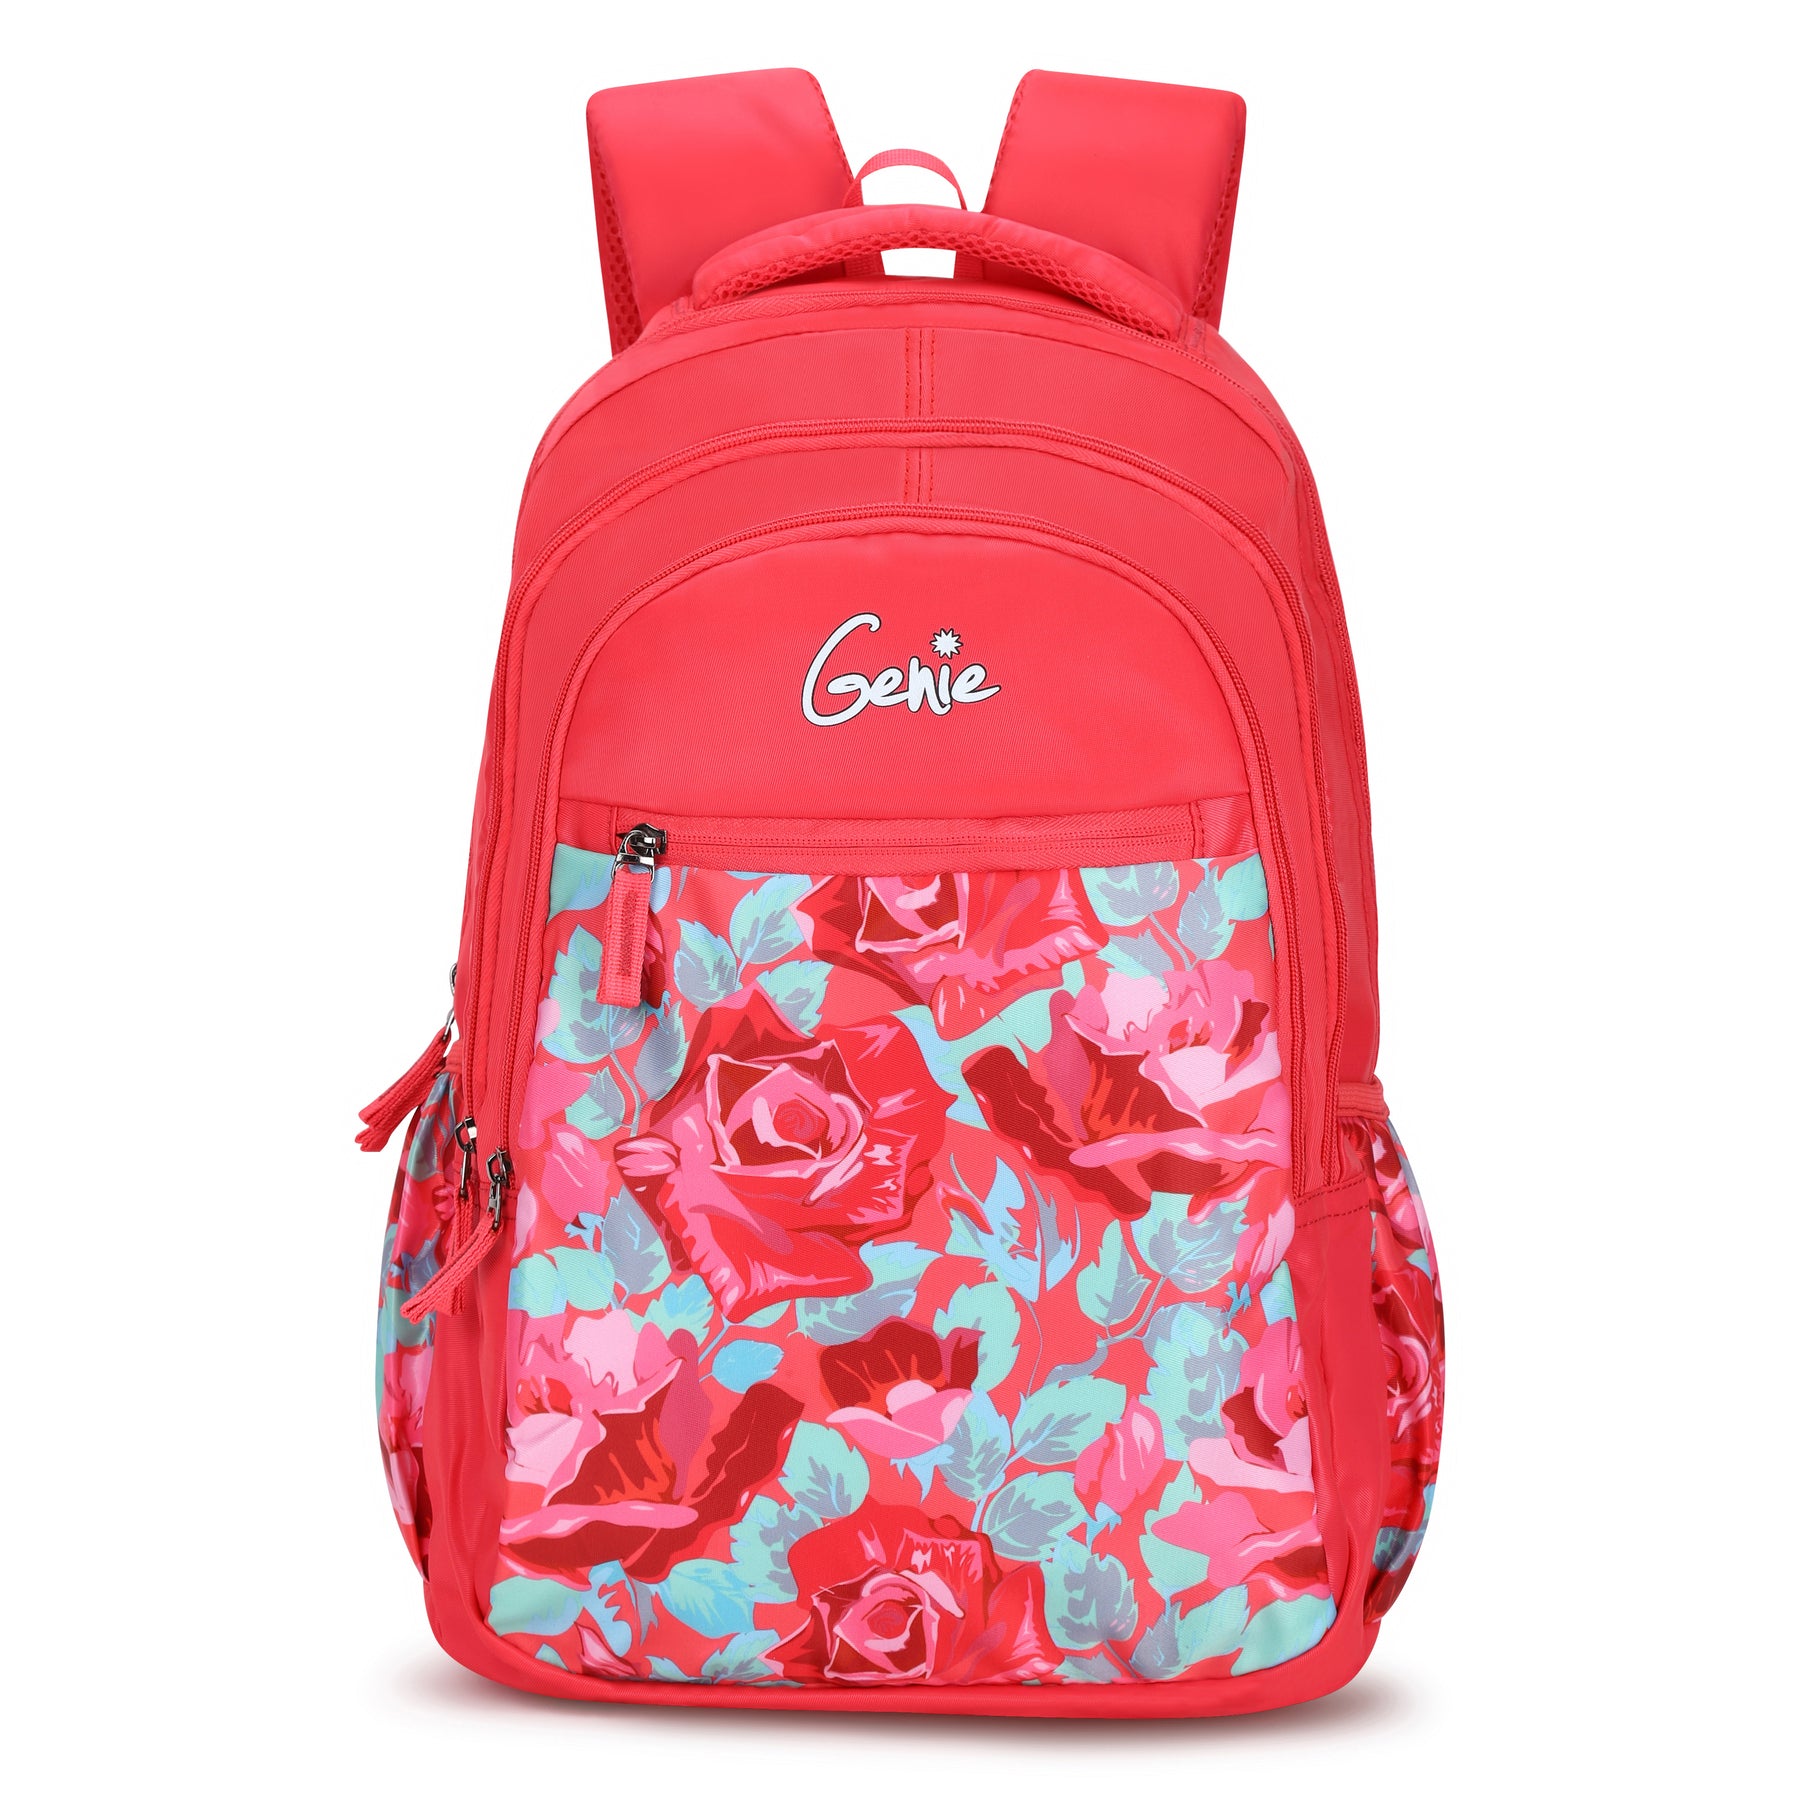 Genie Valentine 27L Pink School Backpack With Easy Access Pockets